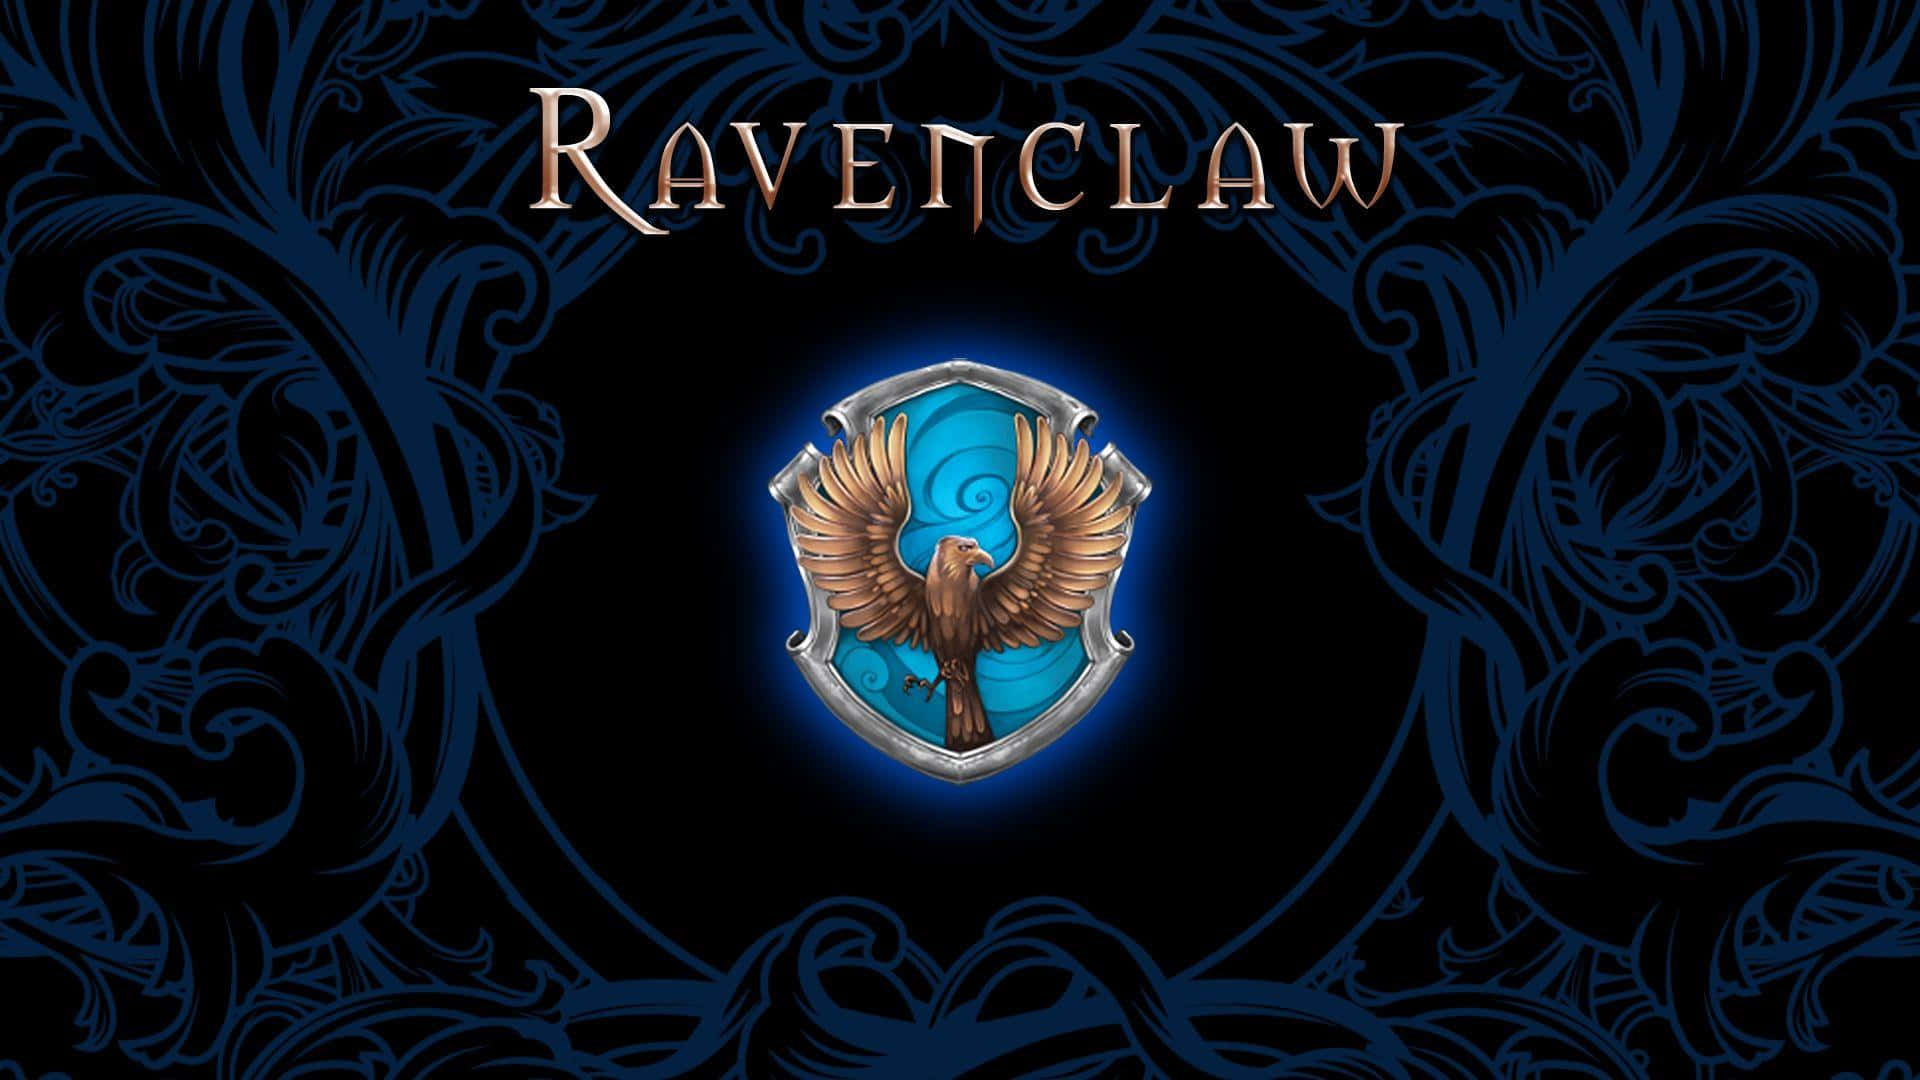 The Ravenclaw Tower of Hogwarts School of Witchcraft and Wizardry Wallpaper